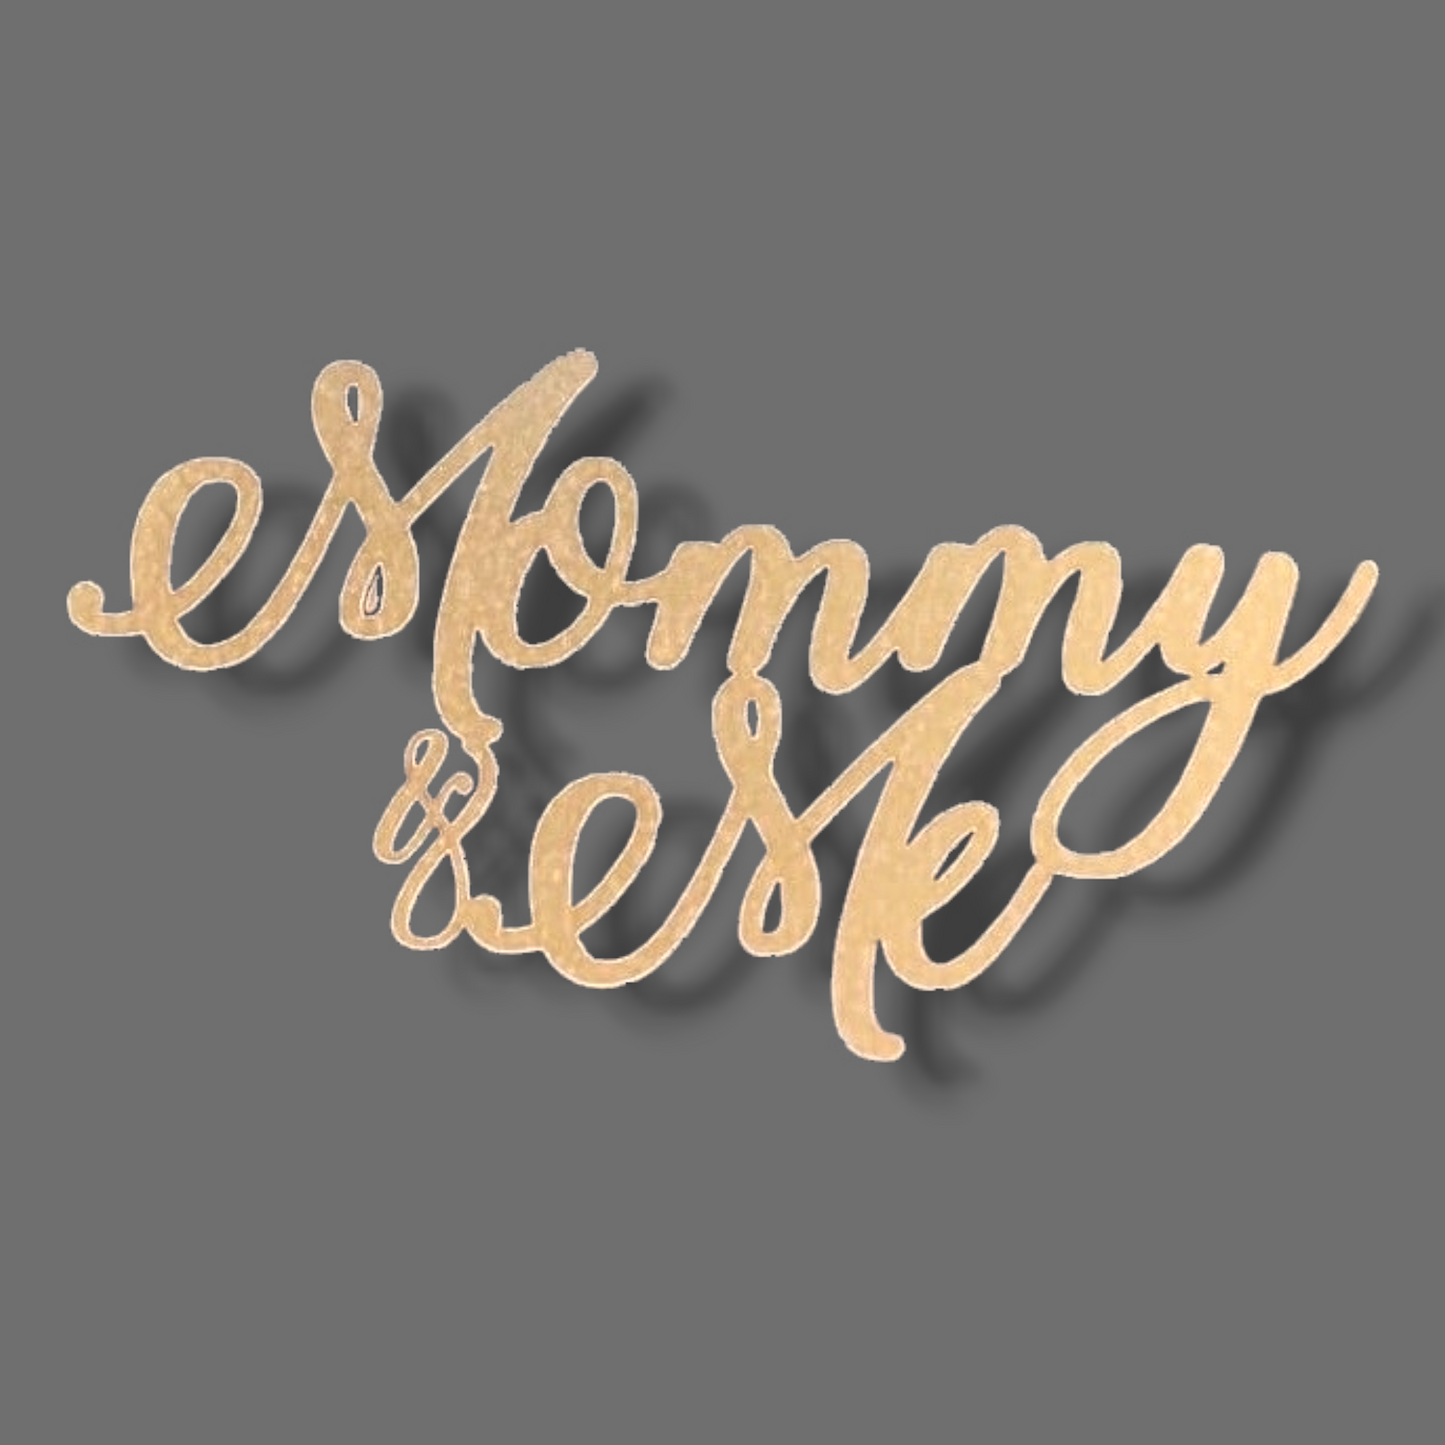 Matte acrylic topper (gold) "Mommy & me"